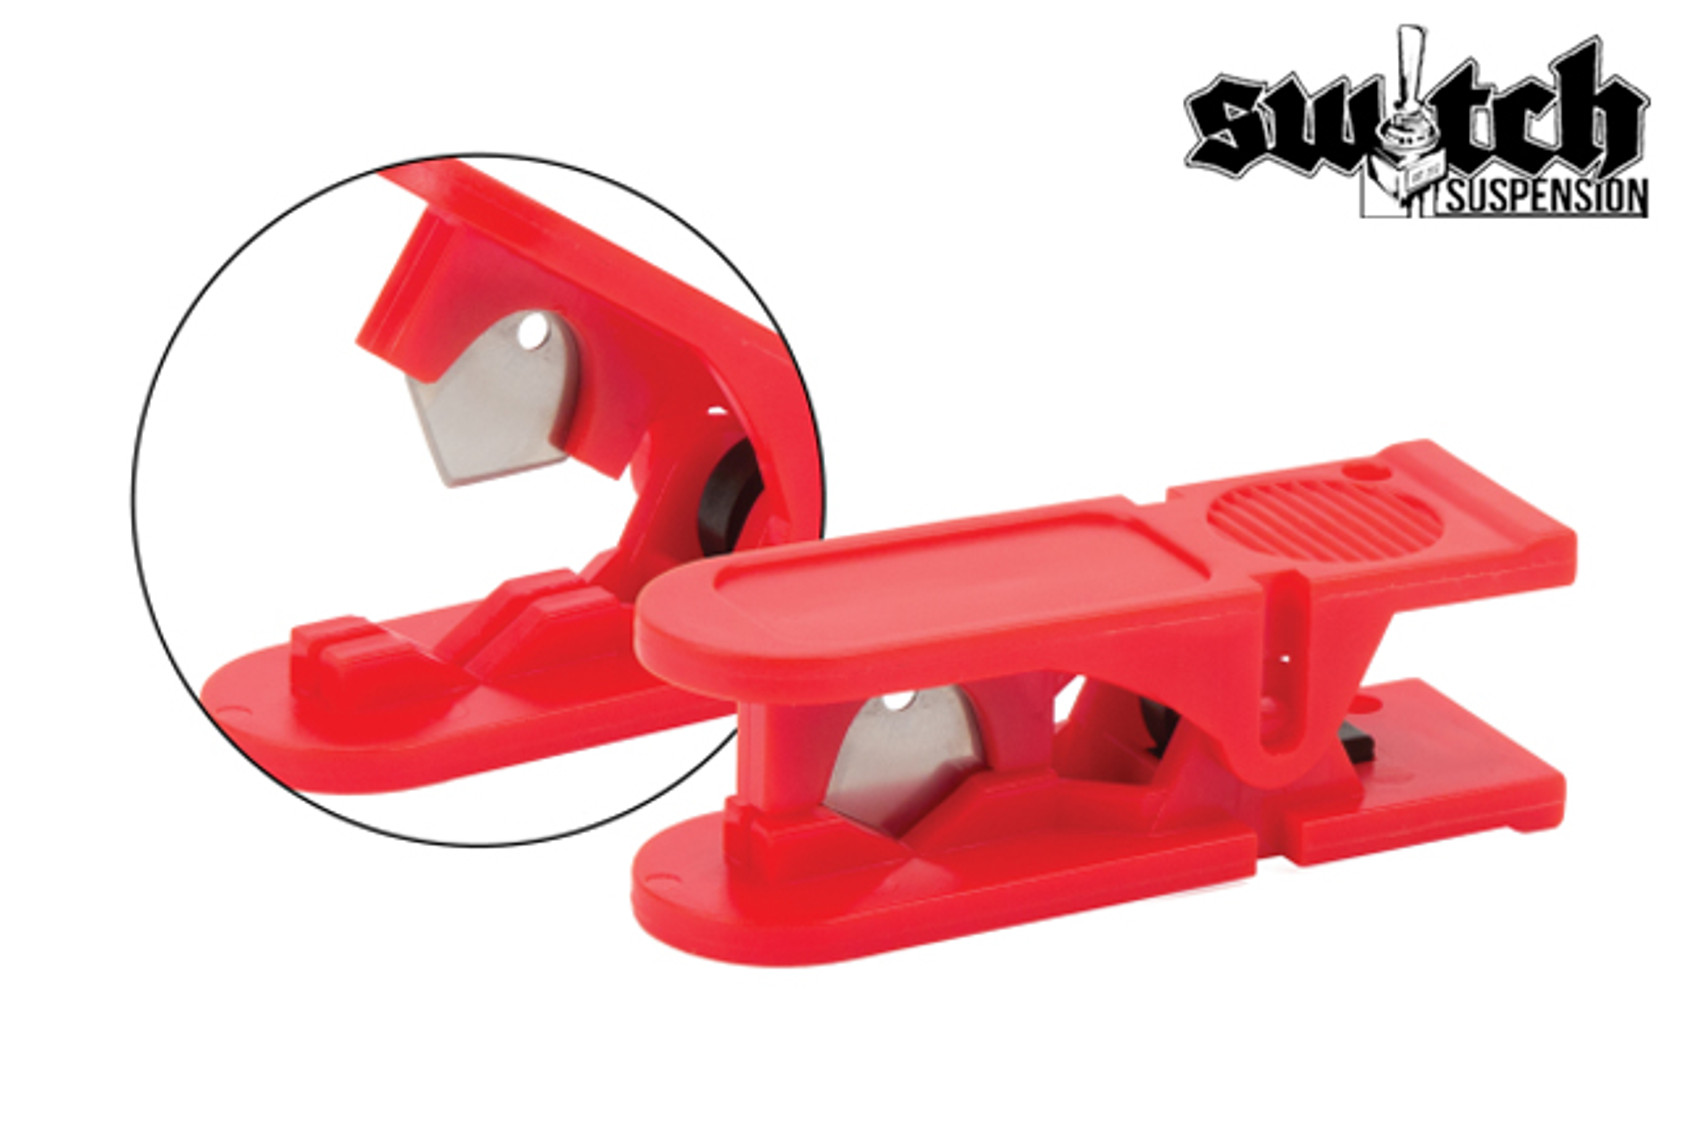 Plastic Airline Cutter Tool - Switch Suspension